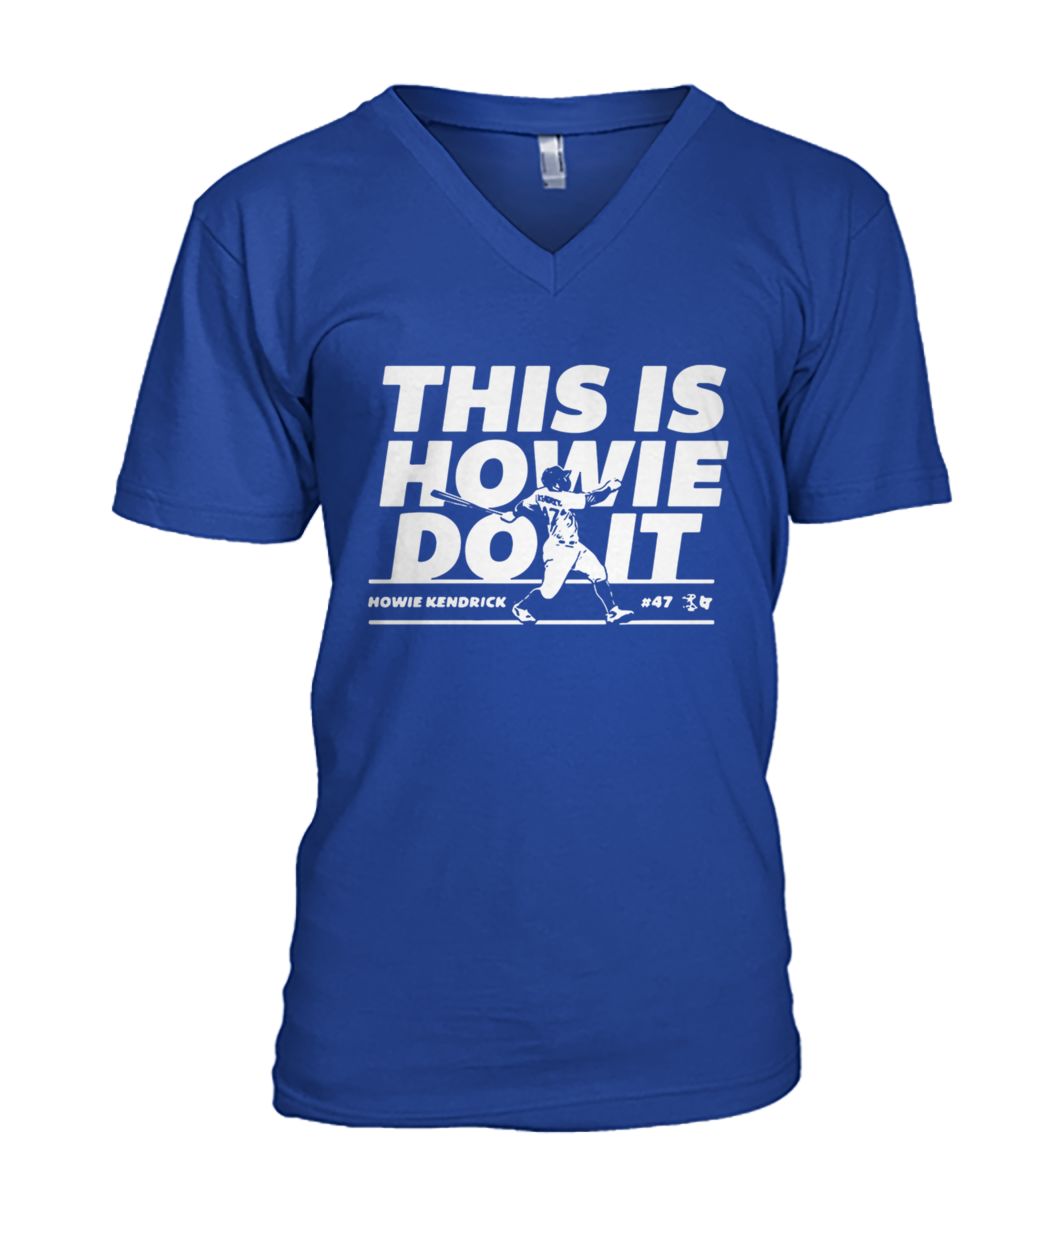 Howie kendrick this is howie do it baseball mens v-neck